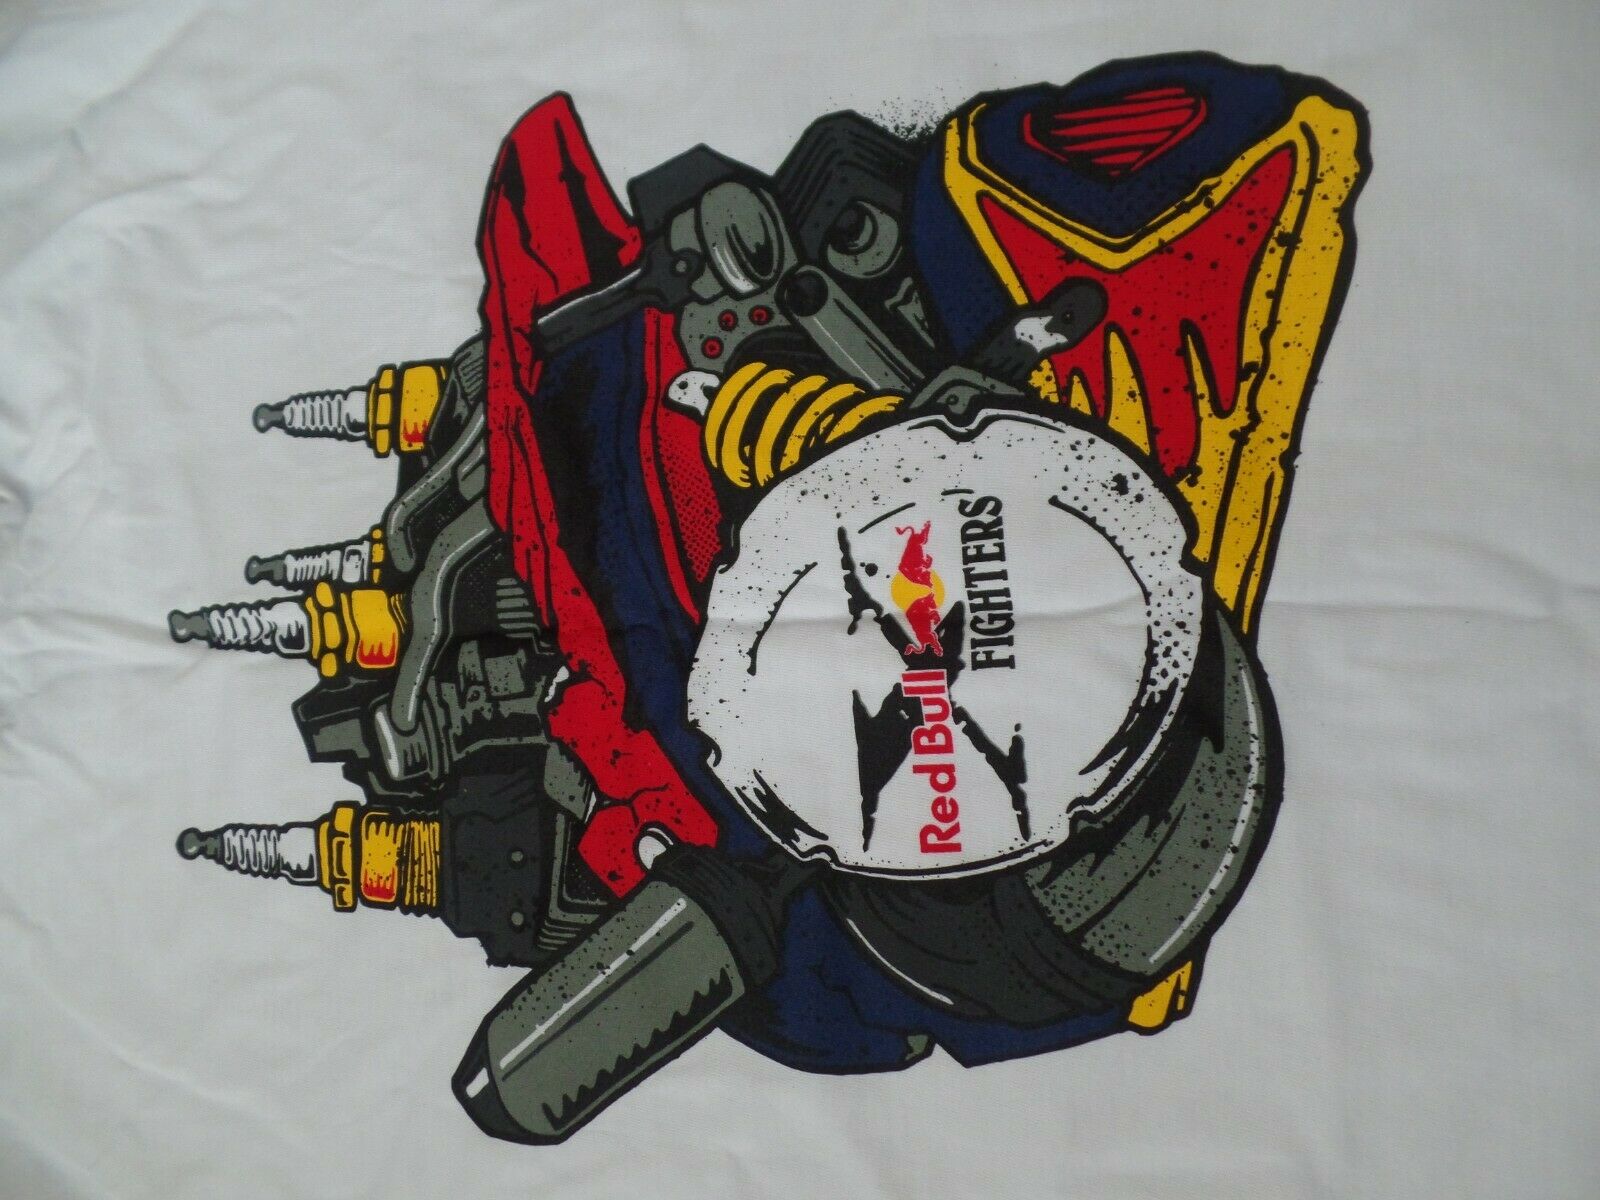 RedBull Fighters Motocross London 2010 T Shirt Large RRP £10.99 CLEARANCE XL £6.99